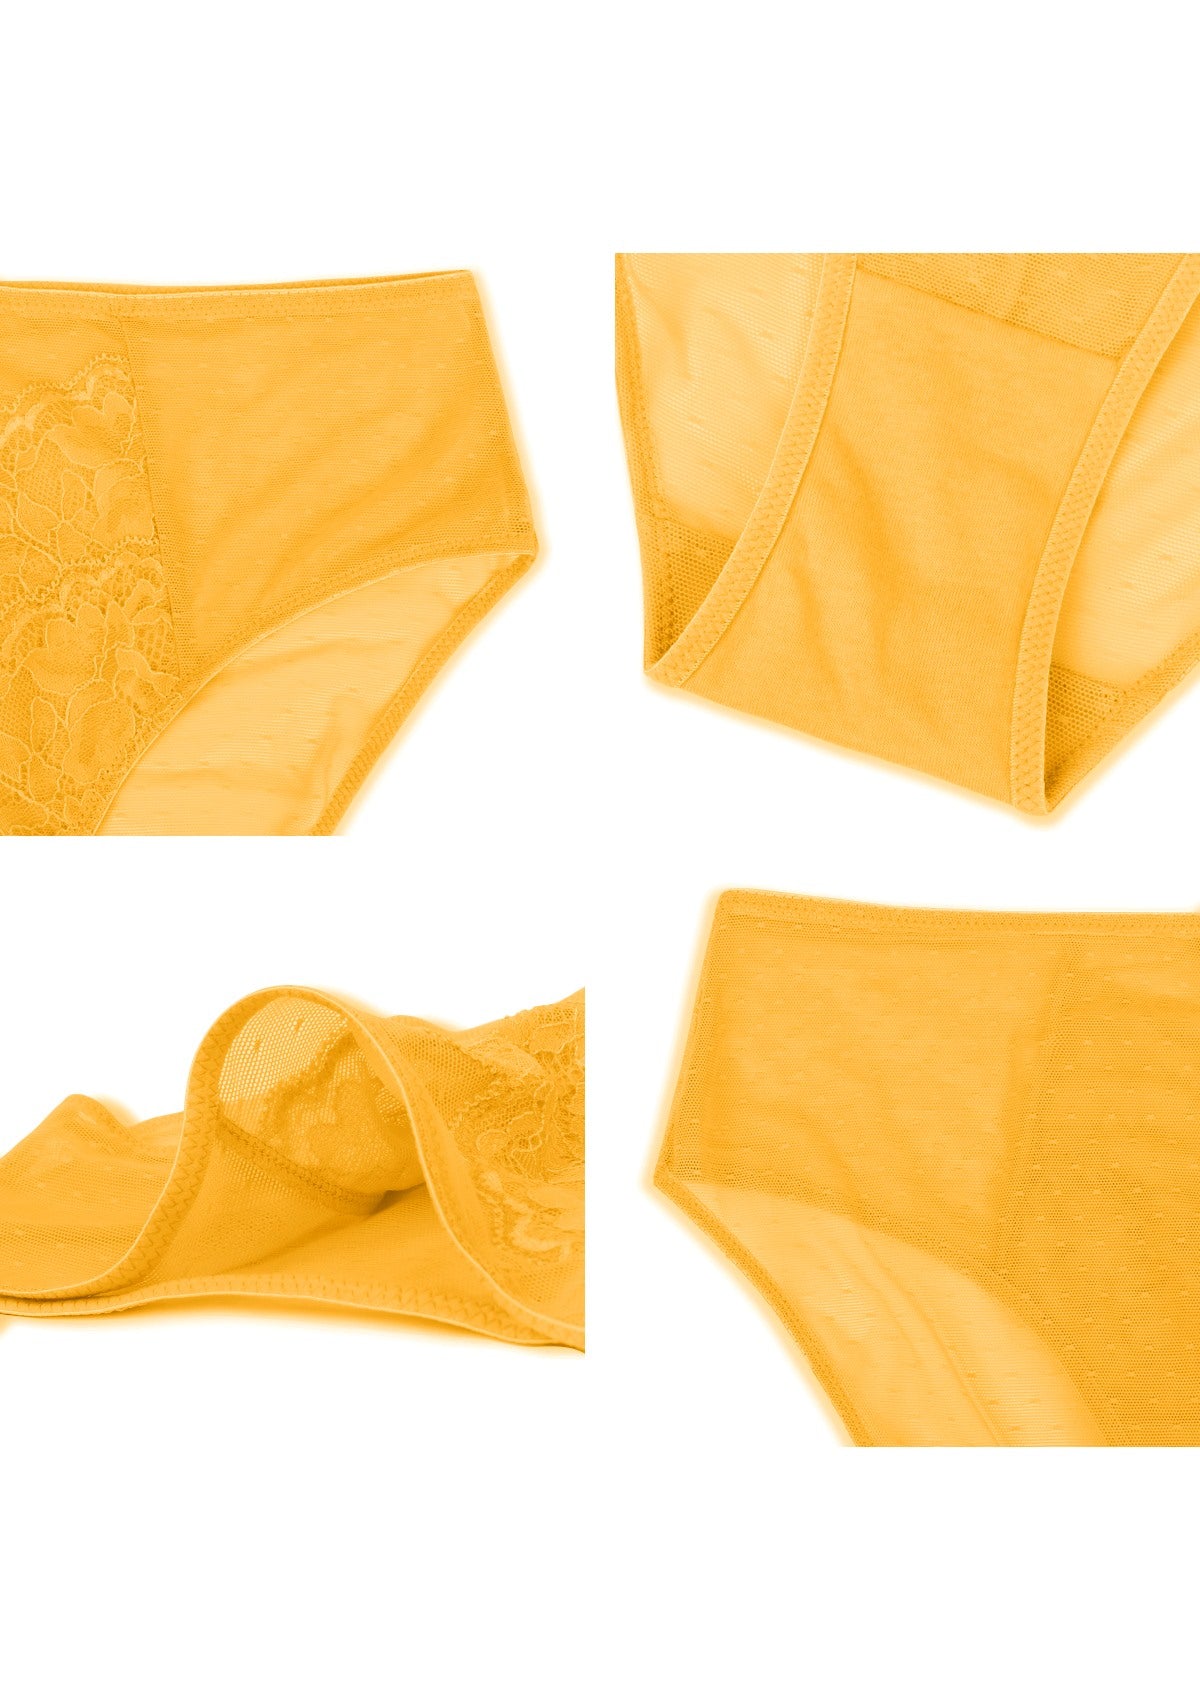 HSIA Enchante High-Rise Floral Lacy Panty-Comfort In Style - M / Cadmium Yellow